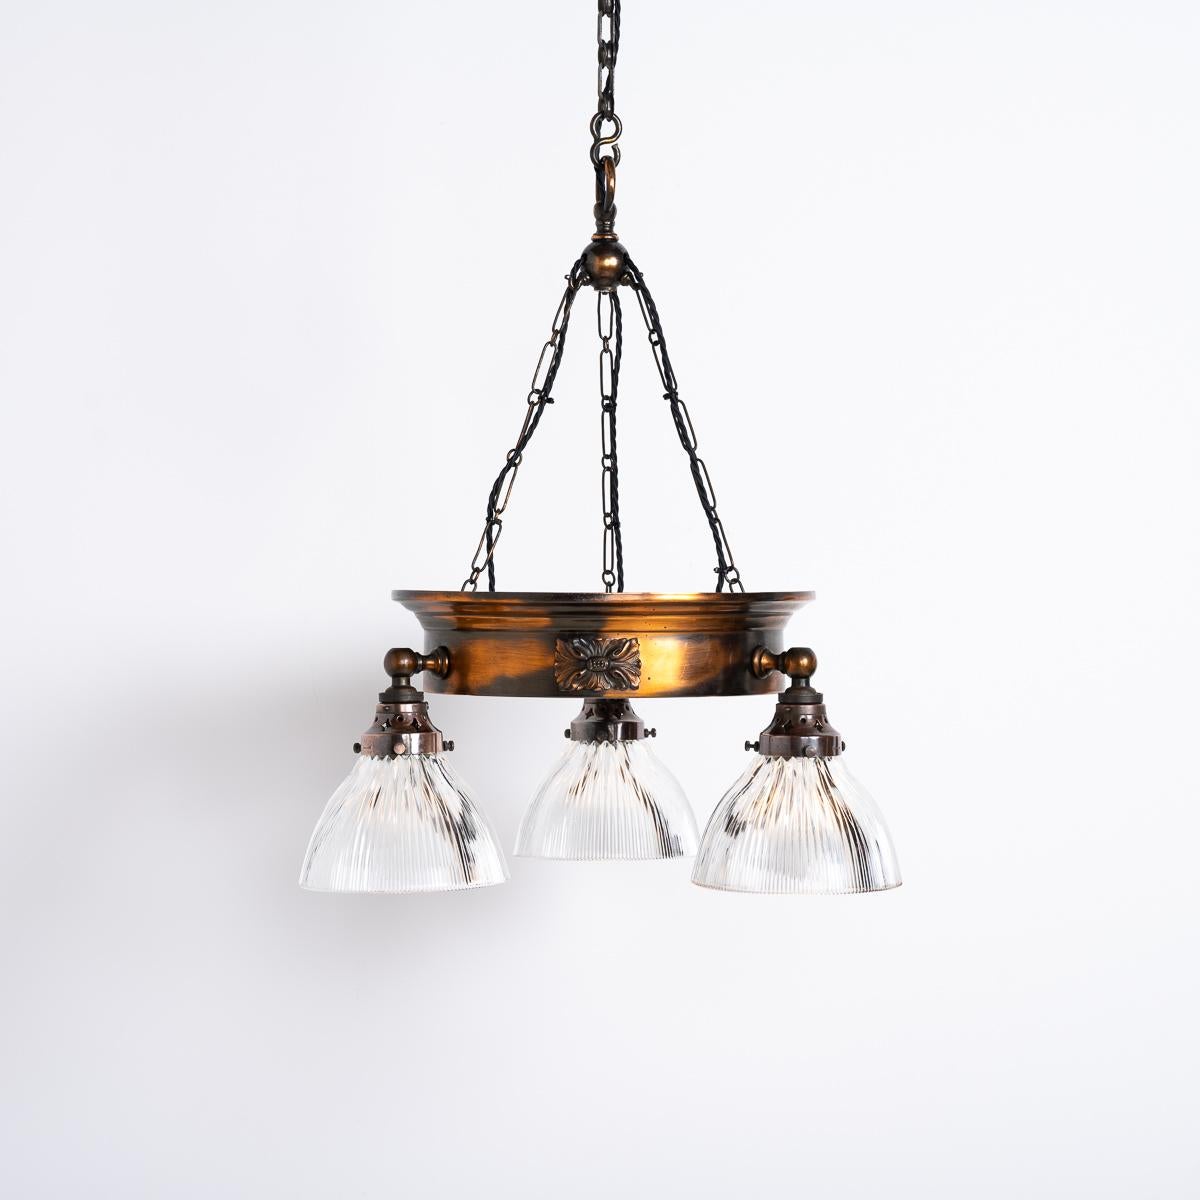 Hand-Crafted Antique Copper Ring Chandelier With Prismatic Holophane Glass Shades By Gec For Sale